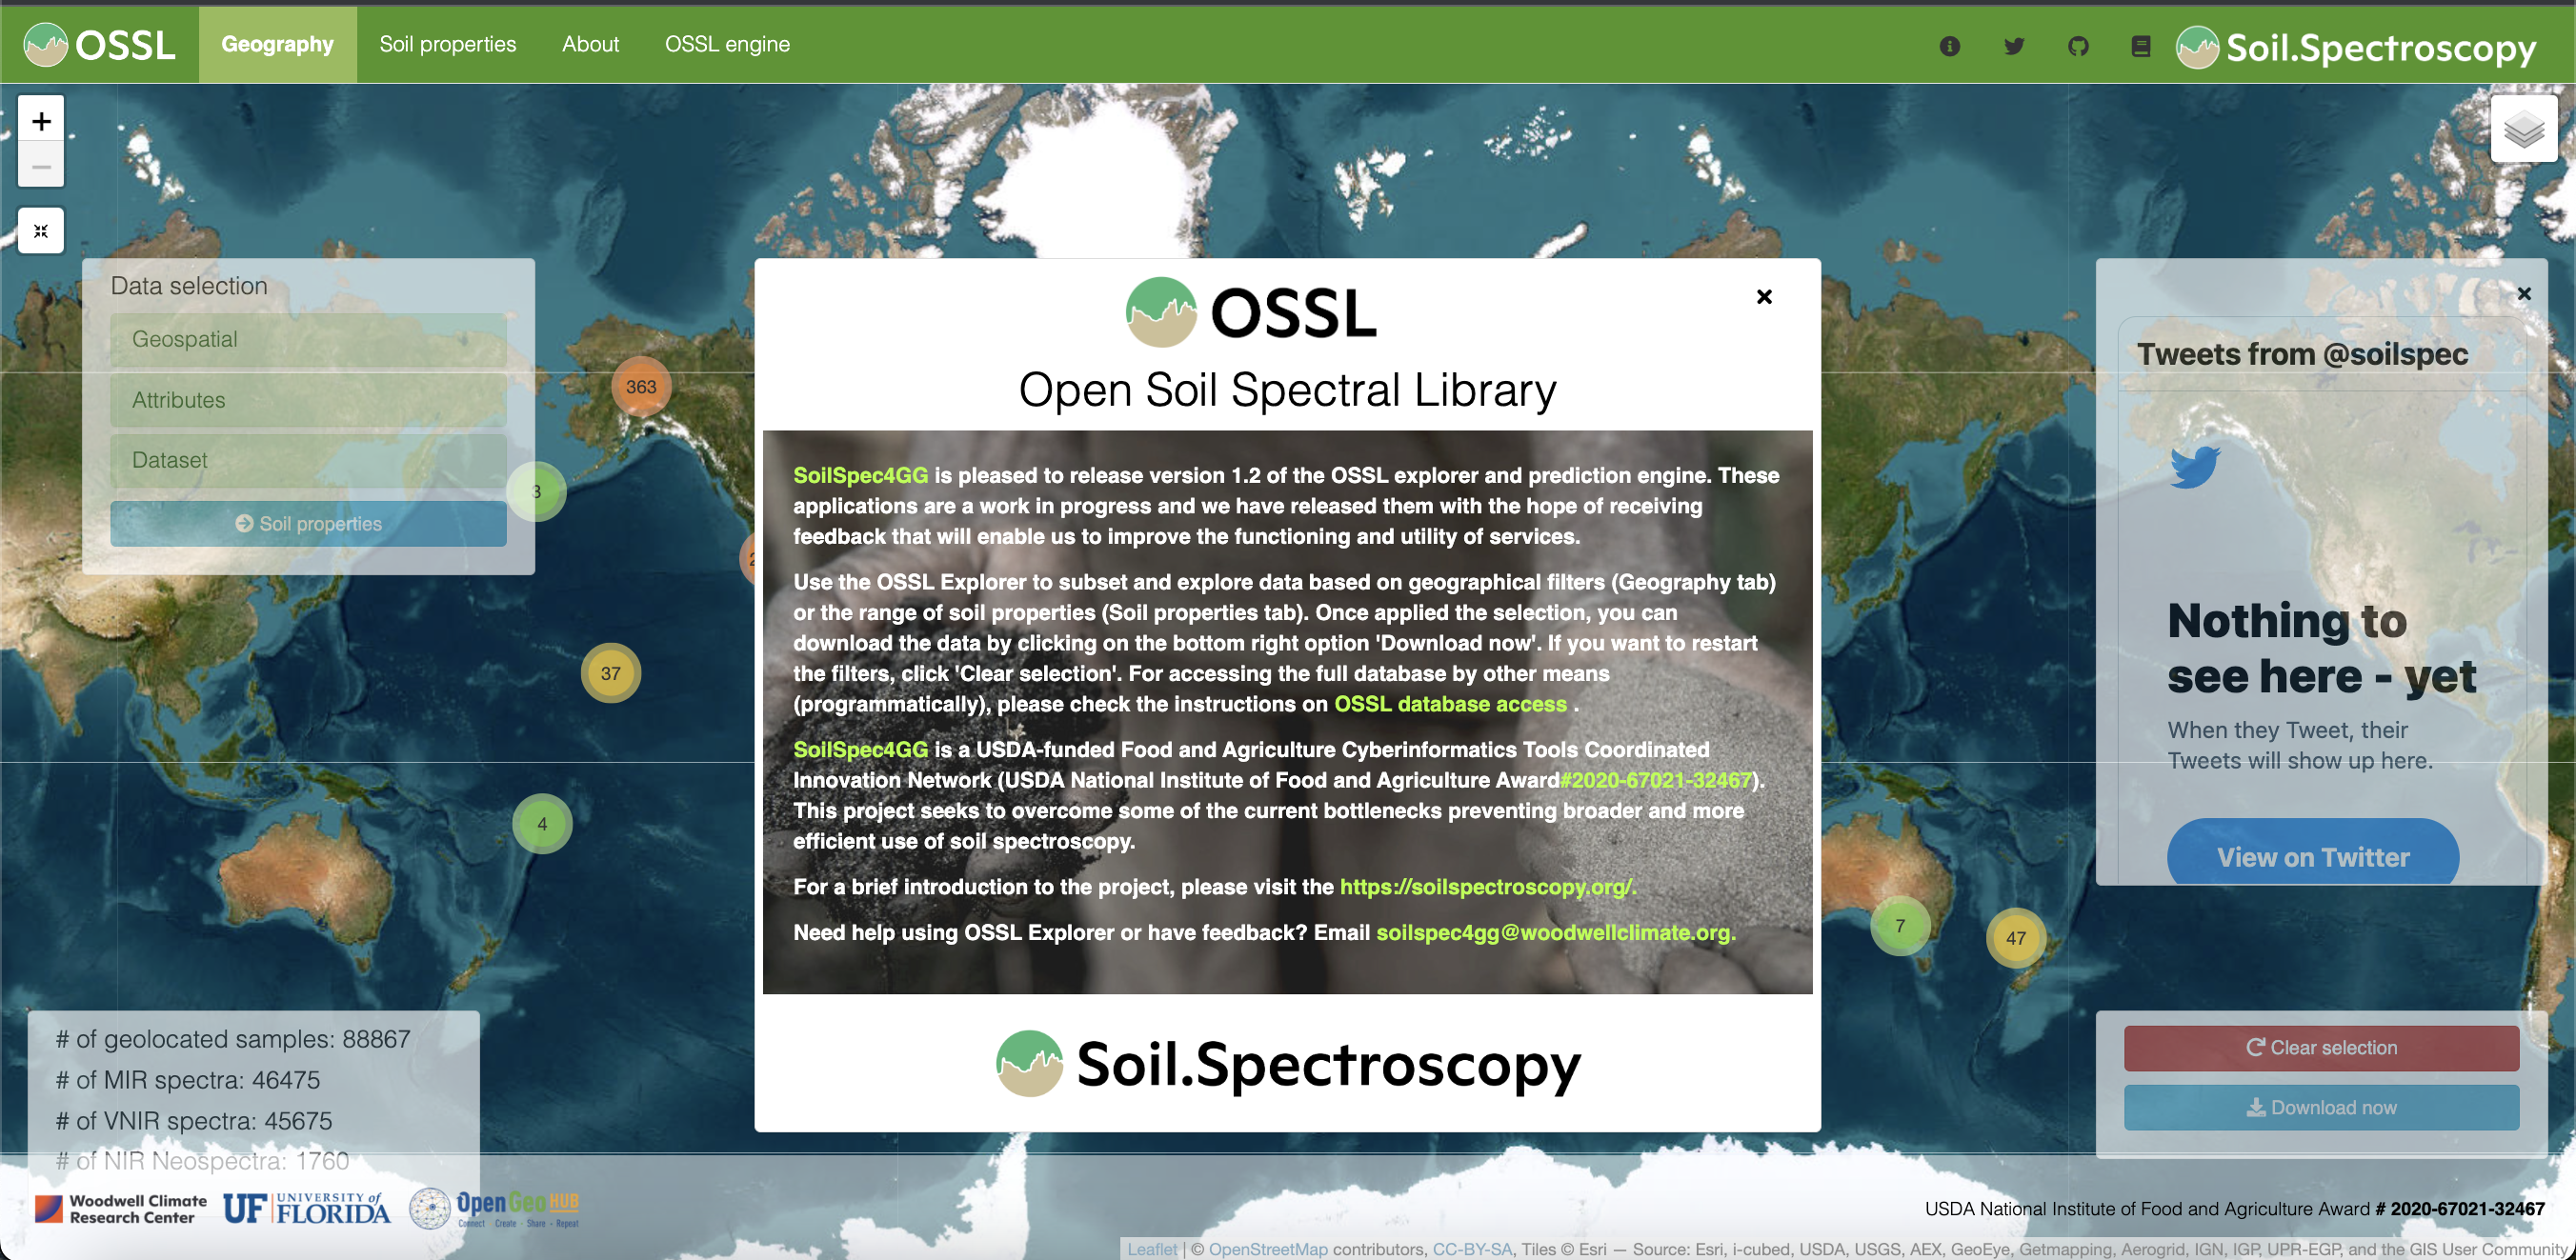 OSSL Explorer initial page that allows filtering OSSL samples based on geographical distribution.